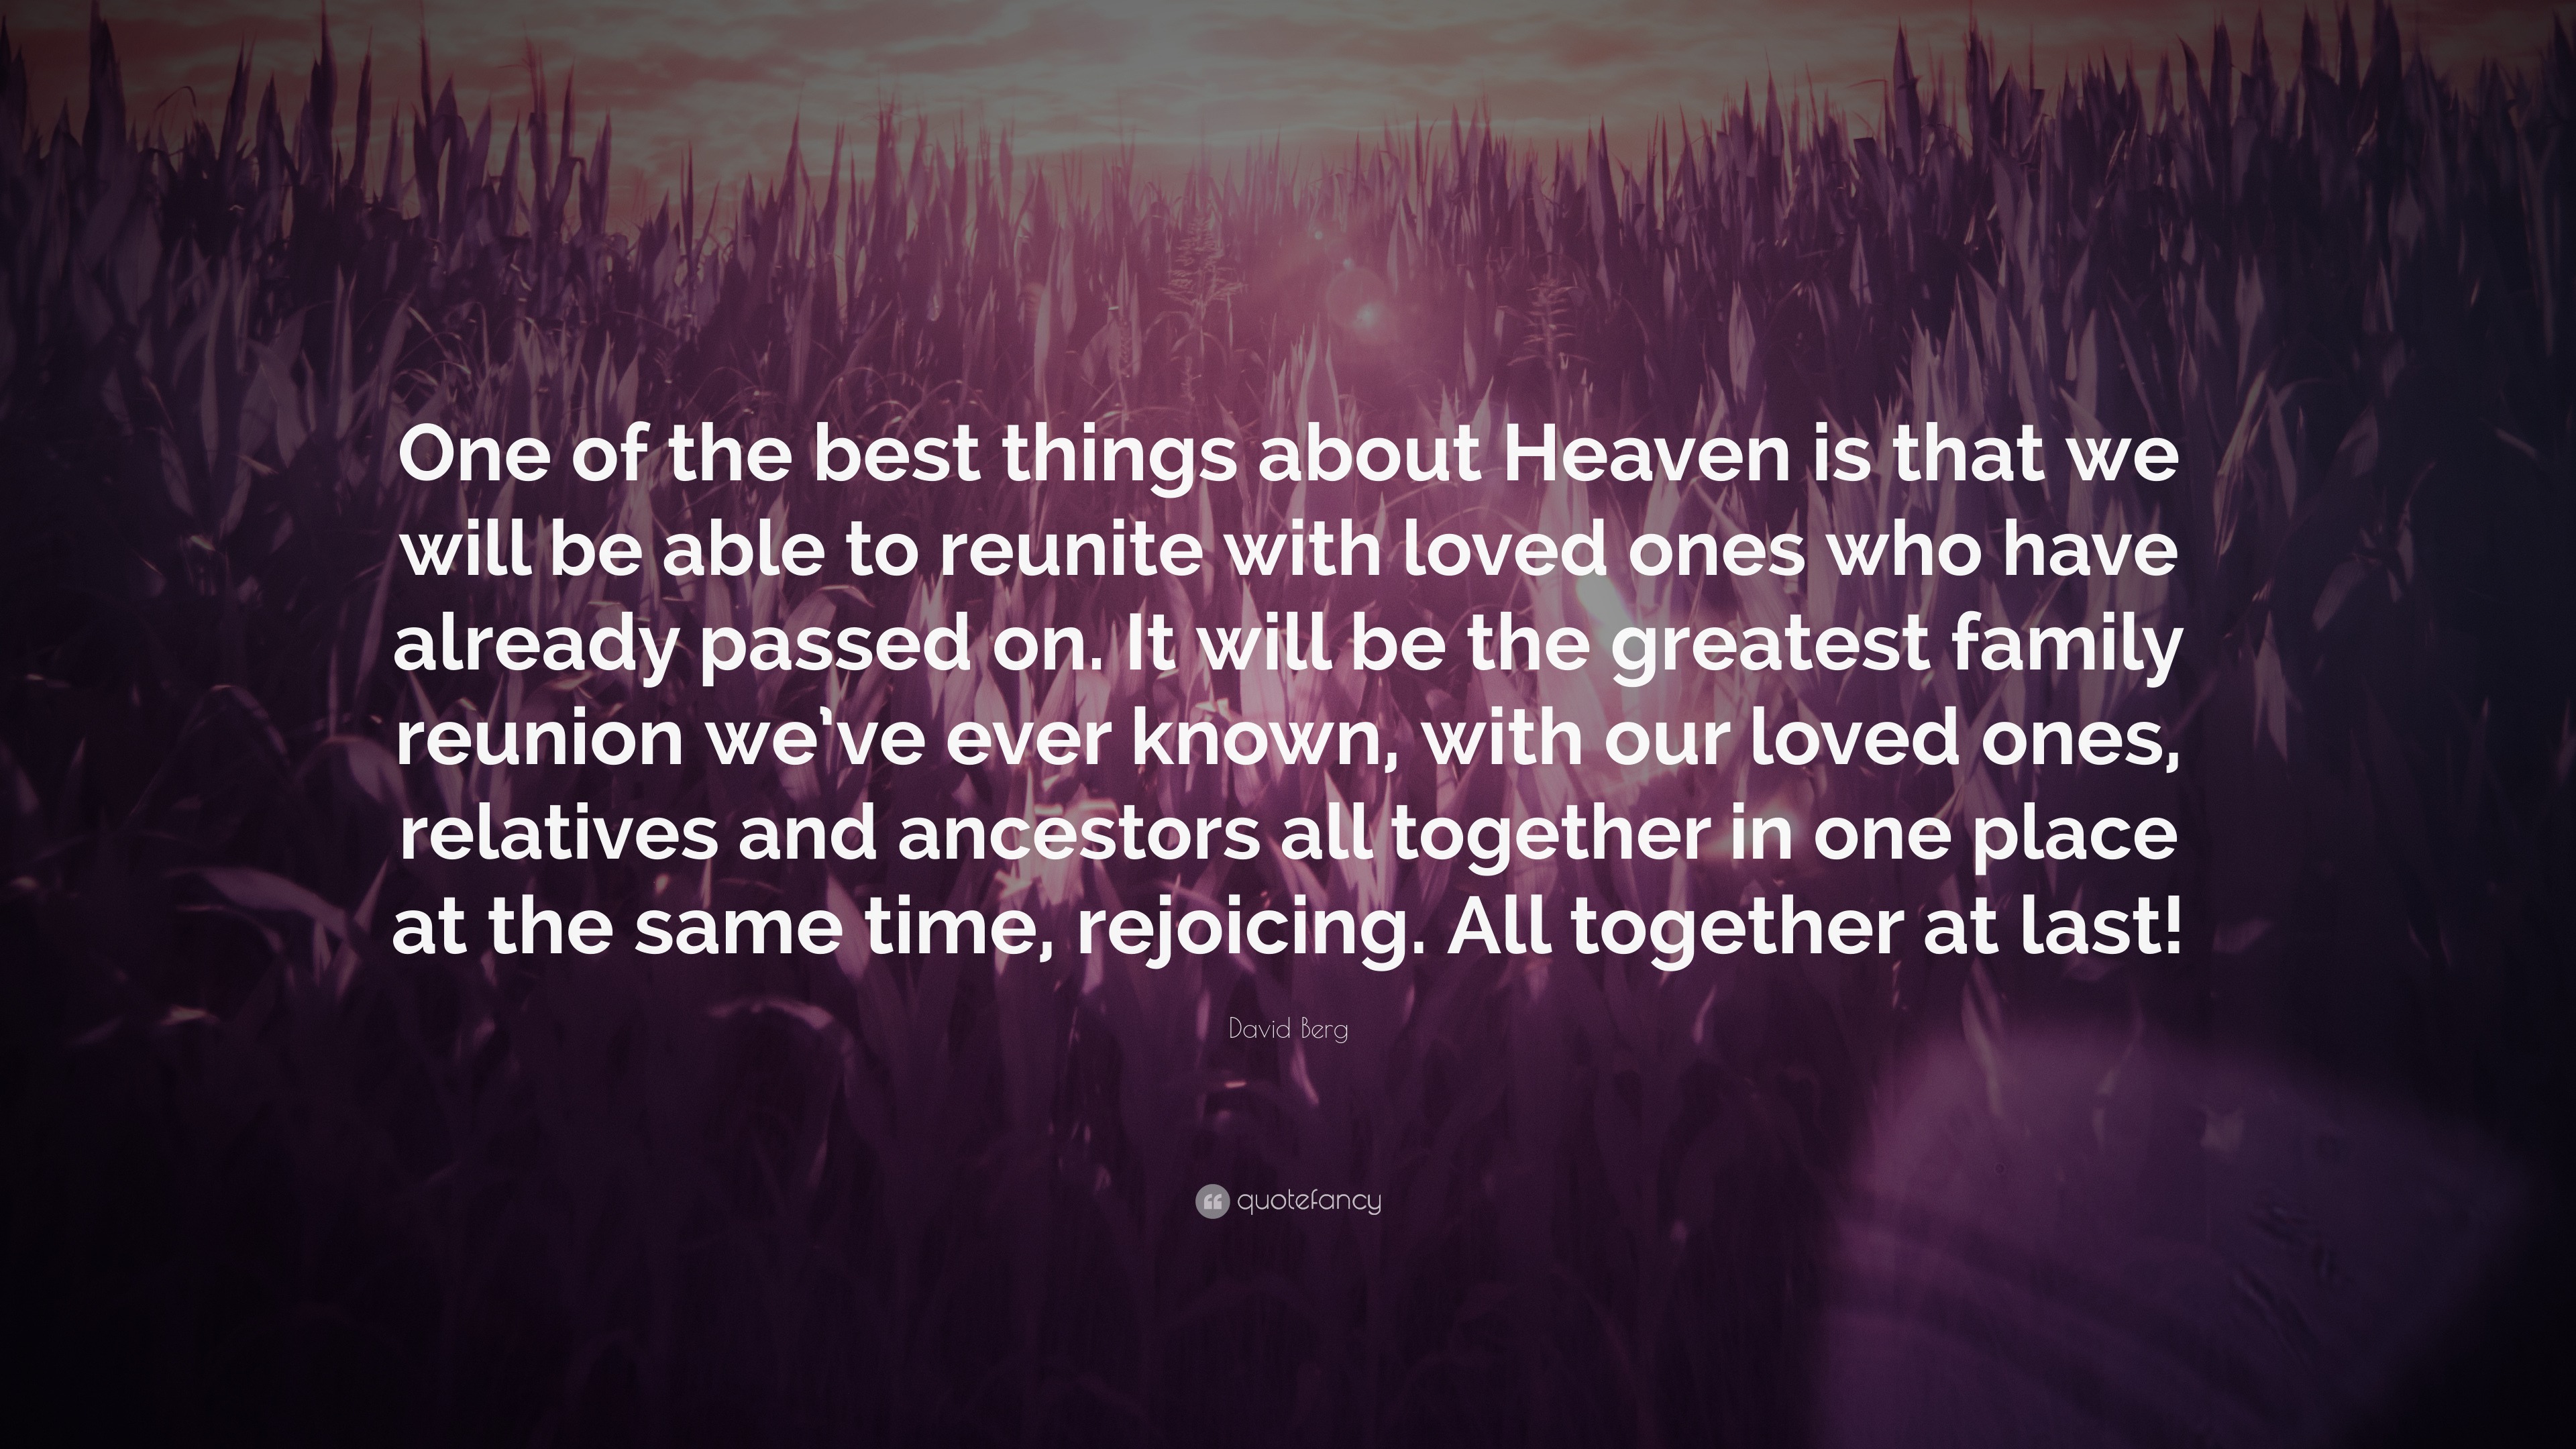 David Berg Quote “ e of the best things about Heaven is that we will